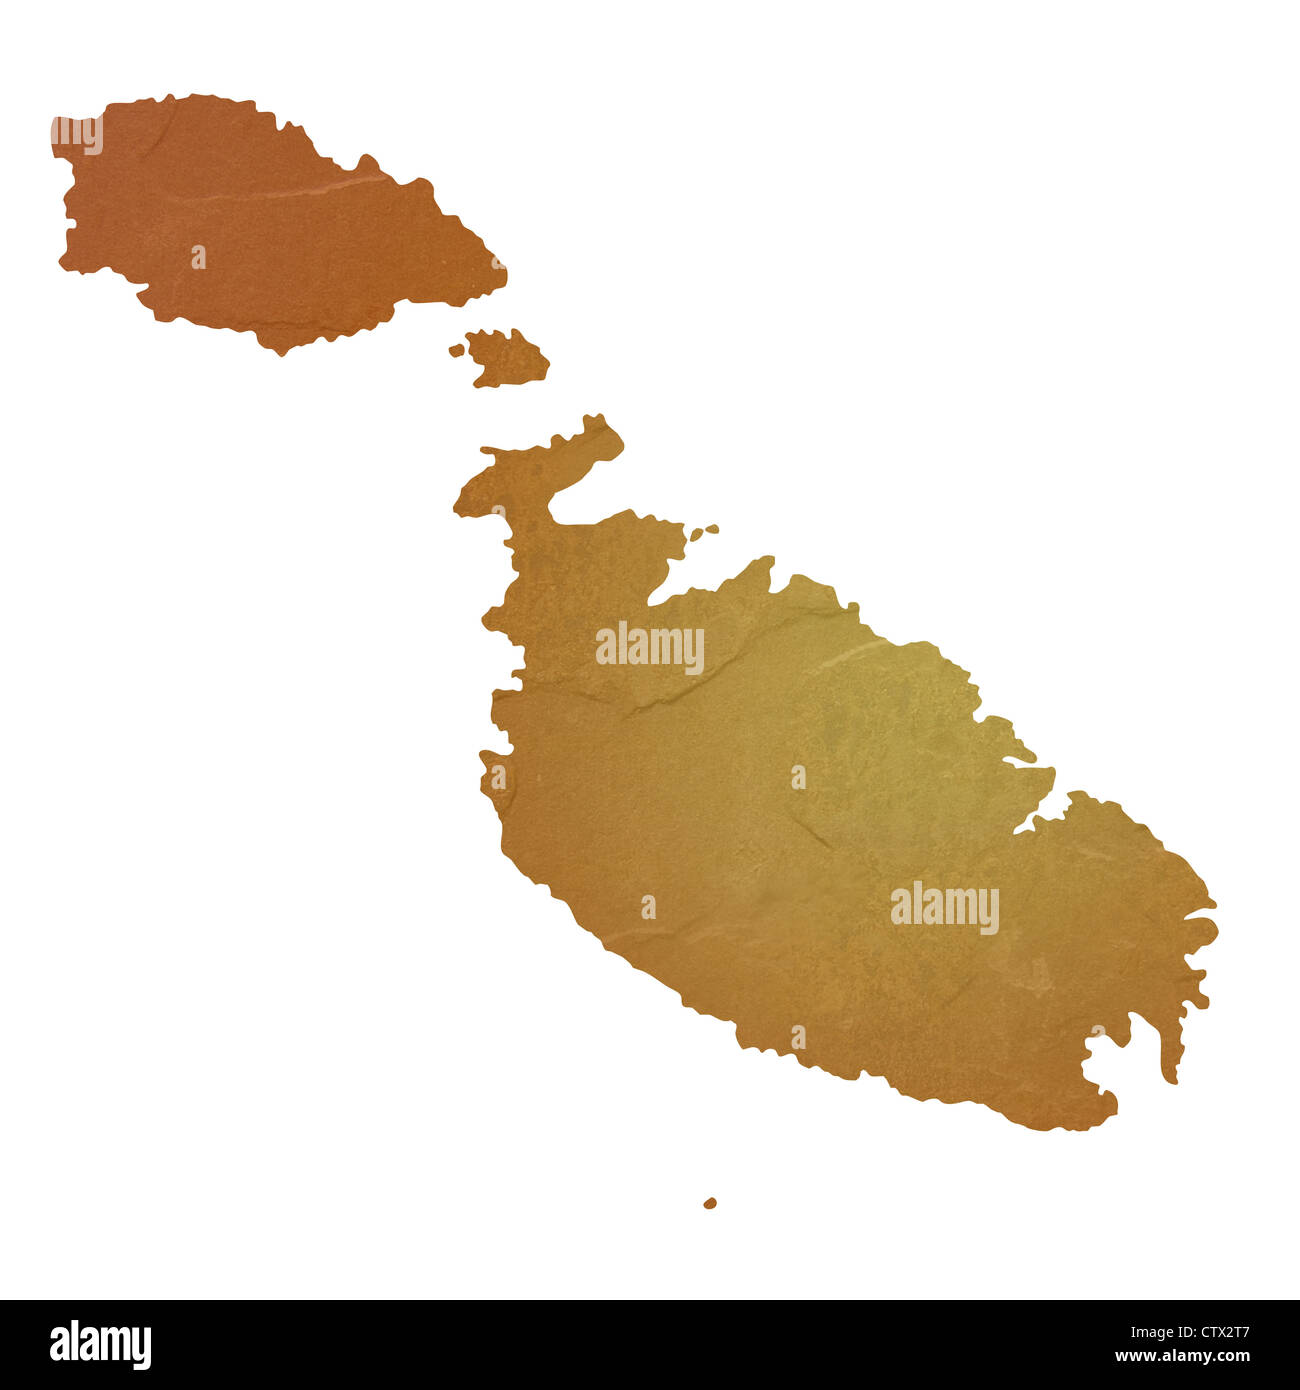 Textured map of Malta map with brown rock or stone texture, isolated on white background with clipping path. Stock Photo